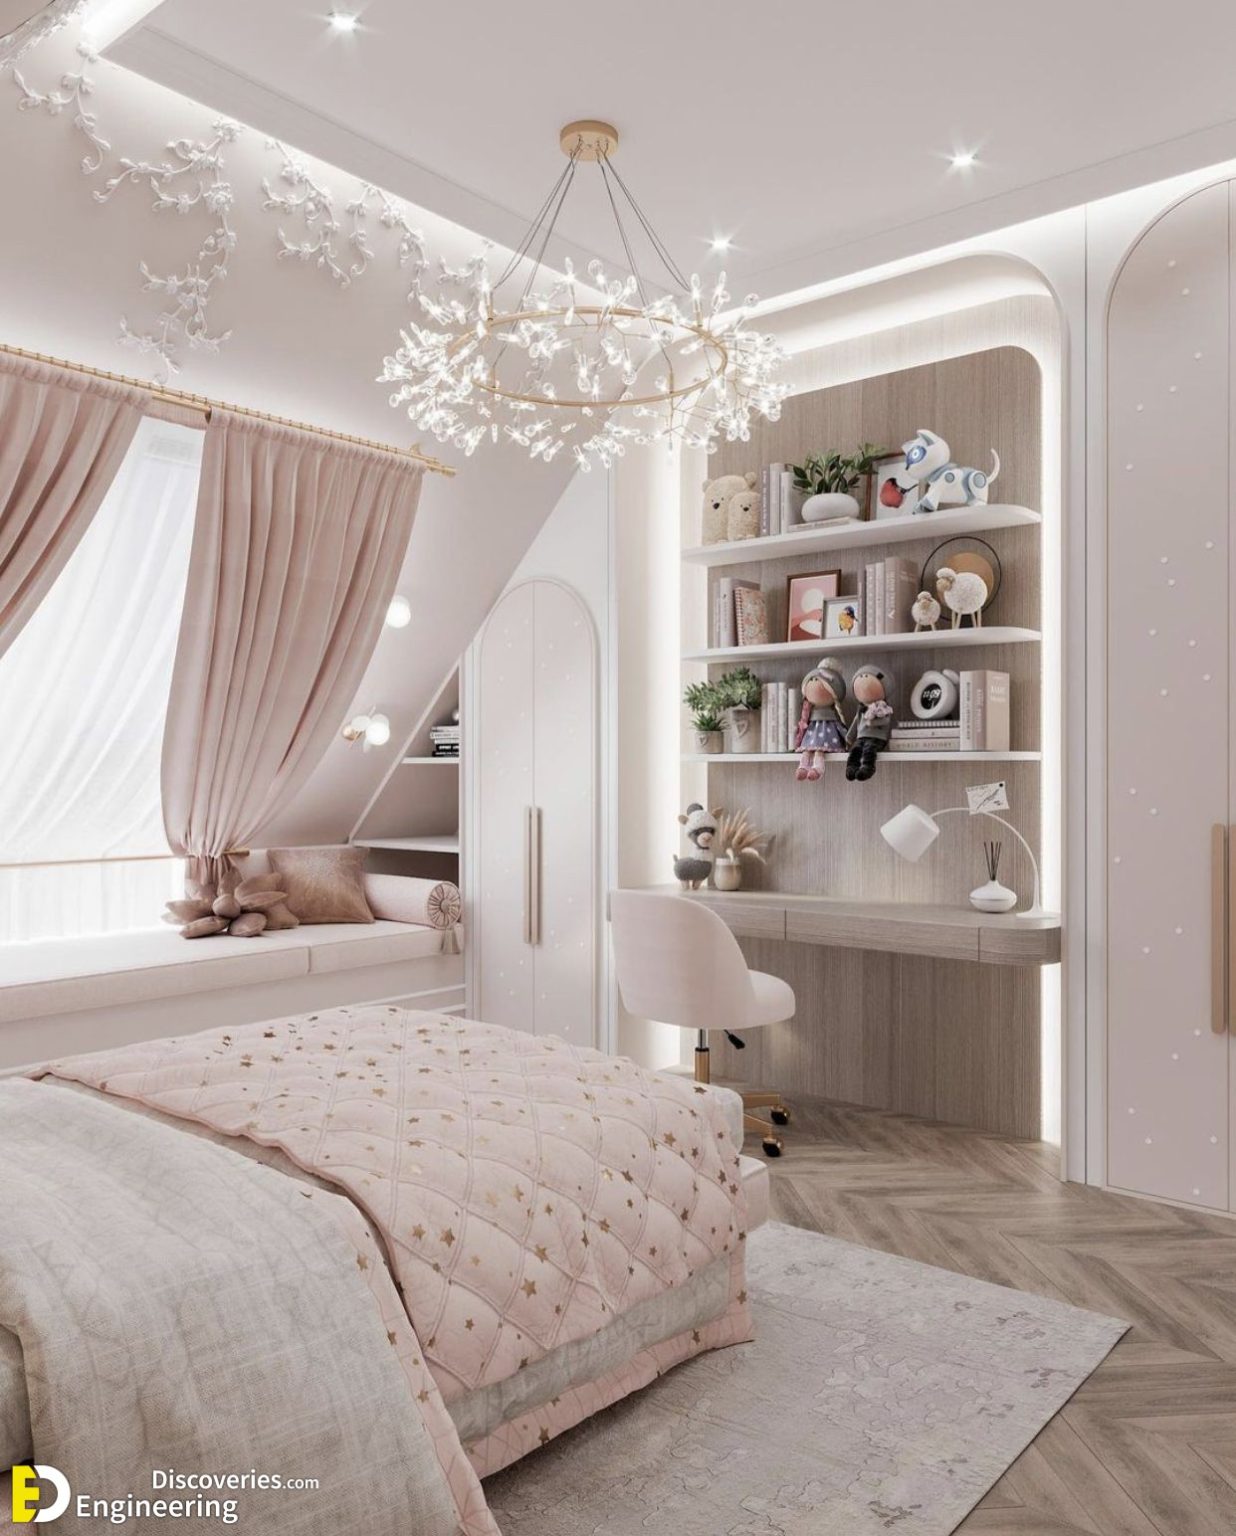 Pretty Kids Room Design In Modern Style | Engineering Discoveries